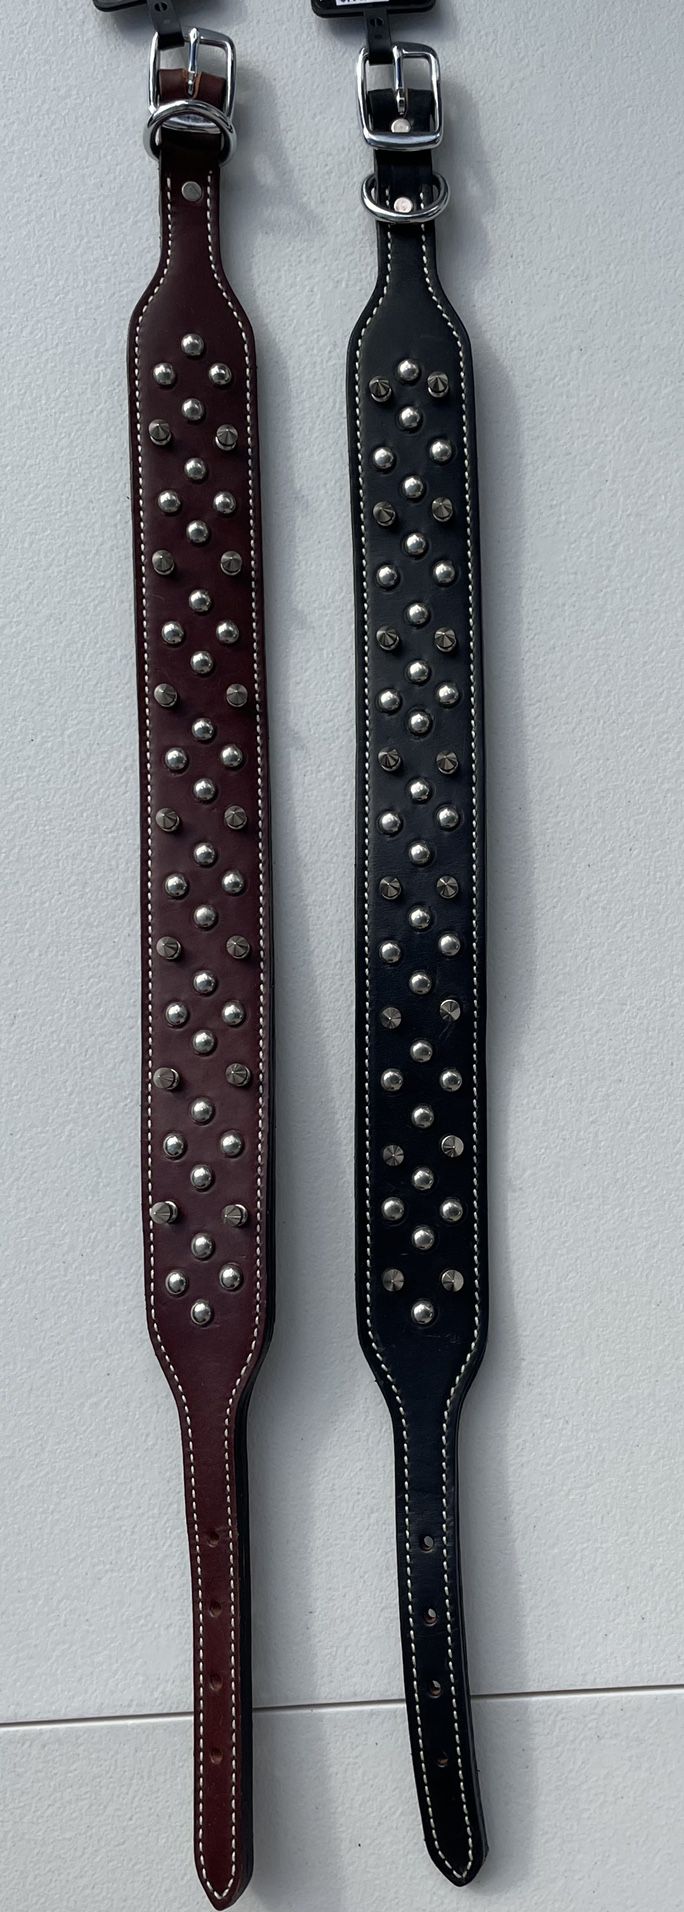 Large Dog Leather Spiked Collars - New!